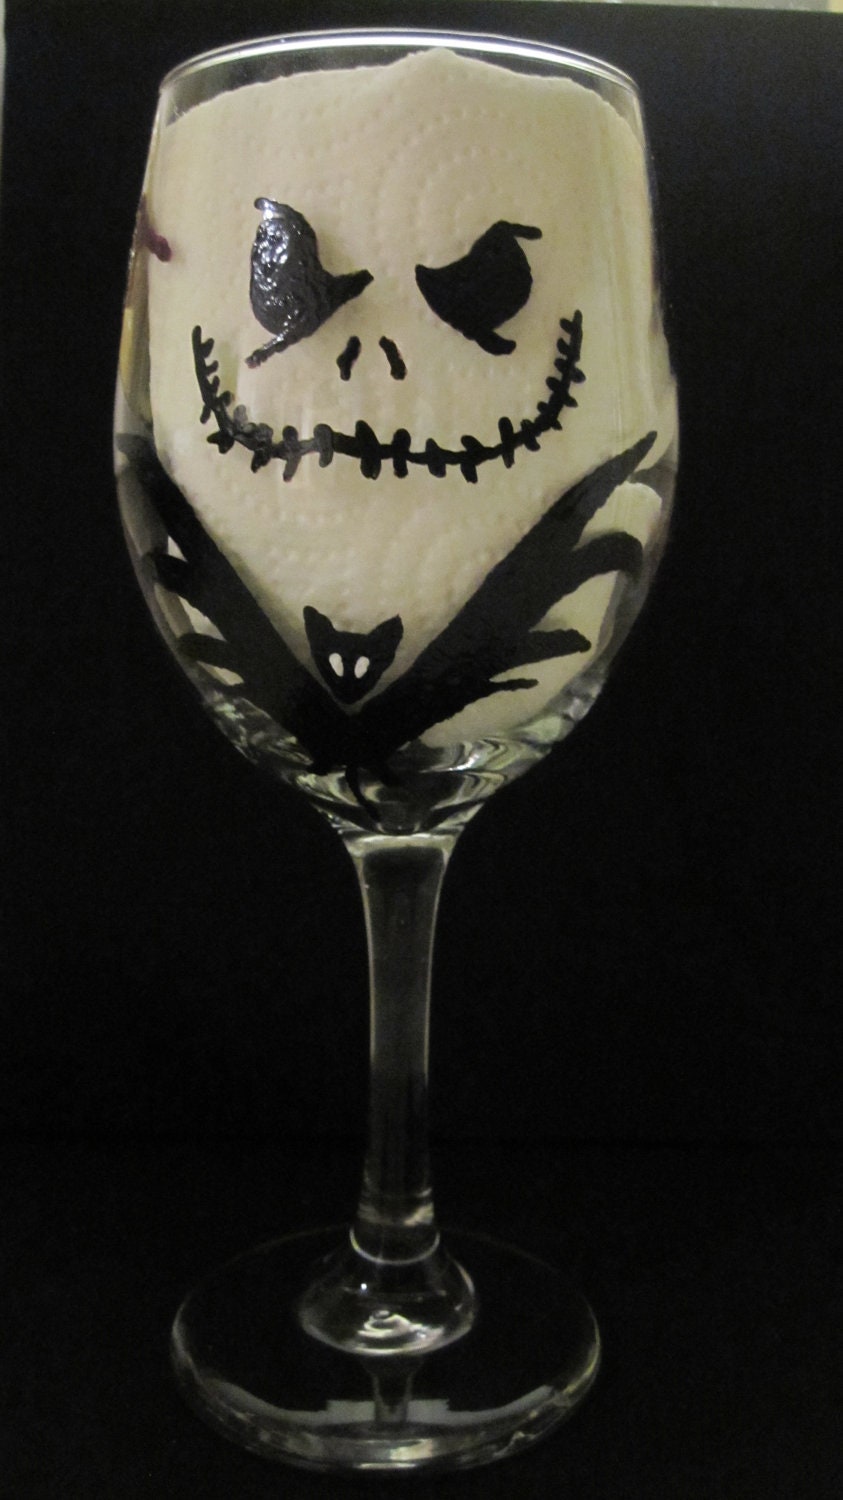 Nightmare Before Christmas Wine Glass by GlassyGlam on Etsy